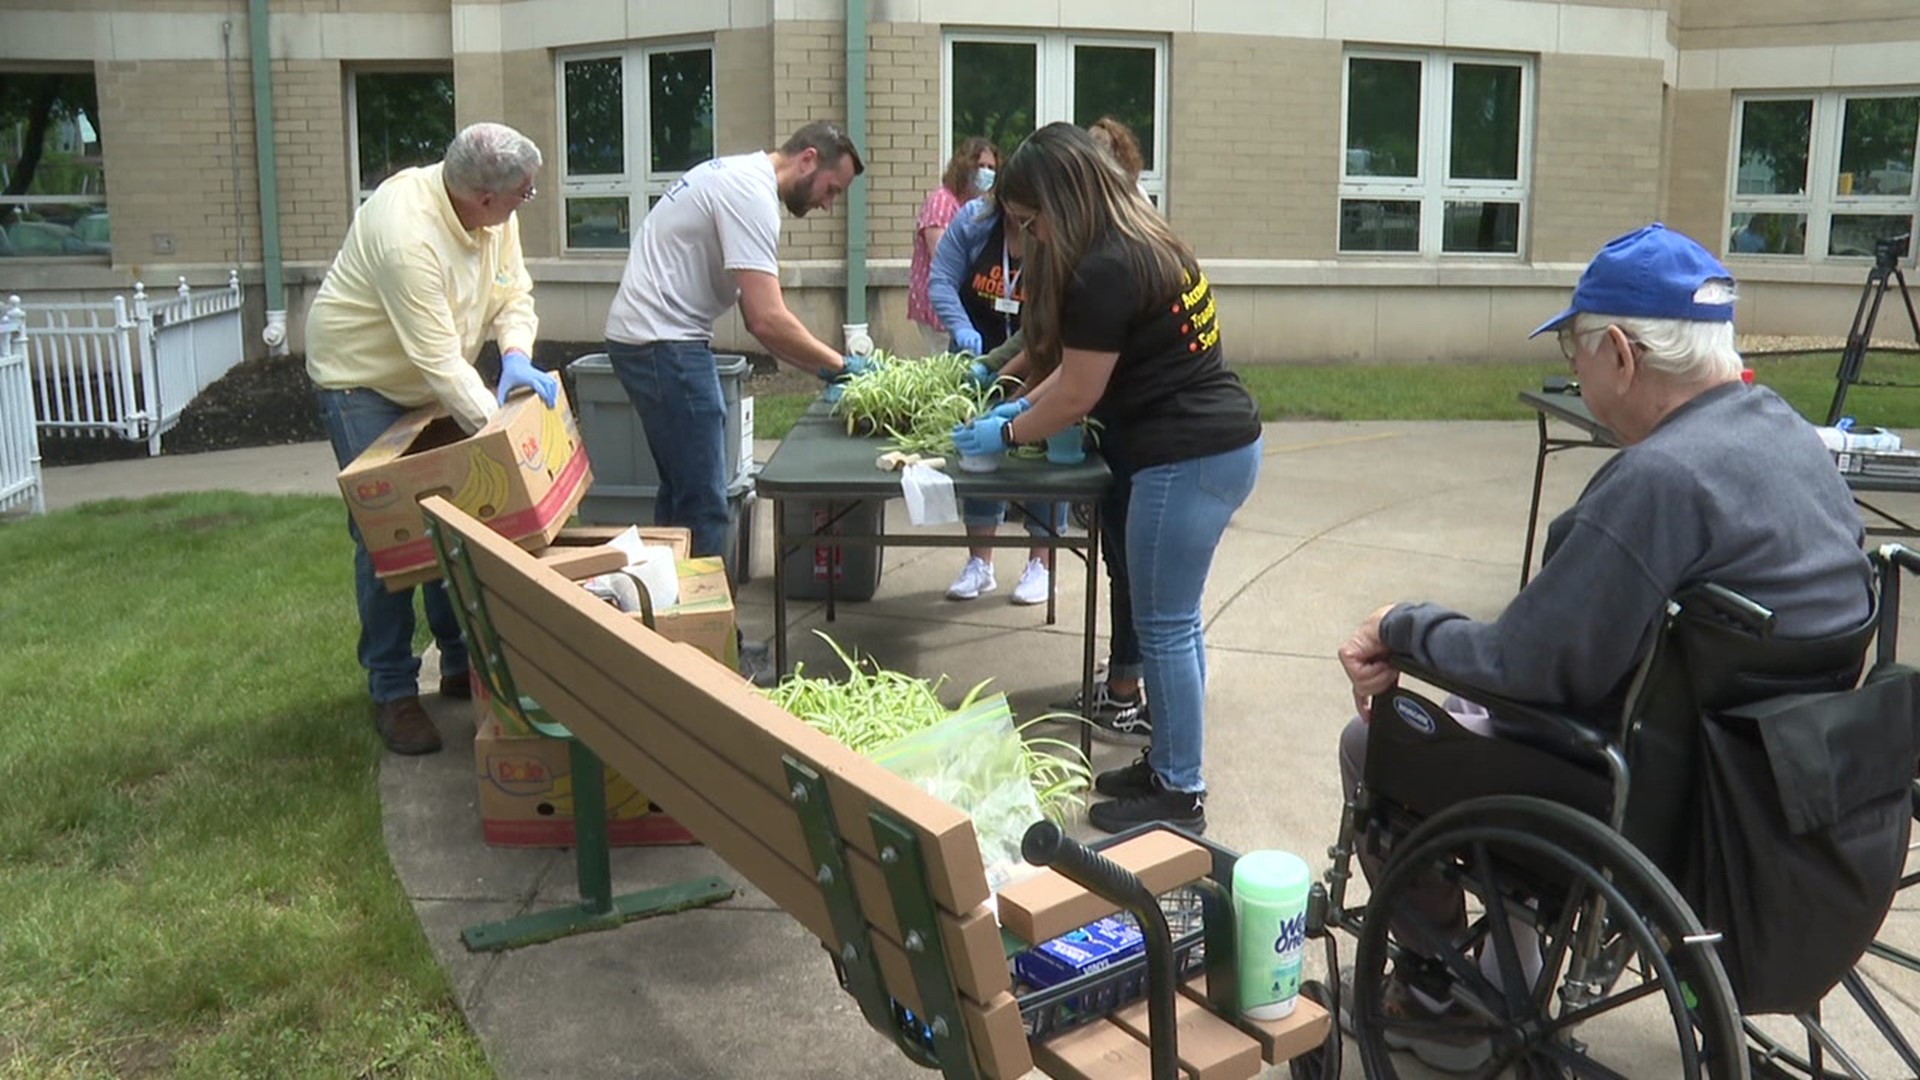 More than 150 spider plants were given to the residents at the Gino Merli Veteran Center.